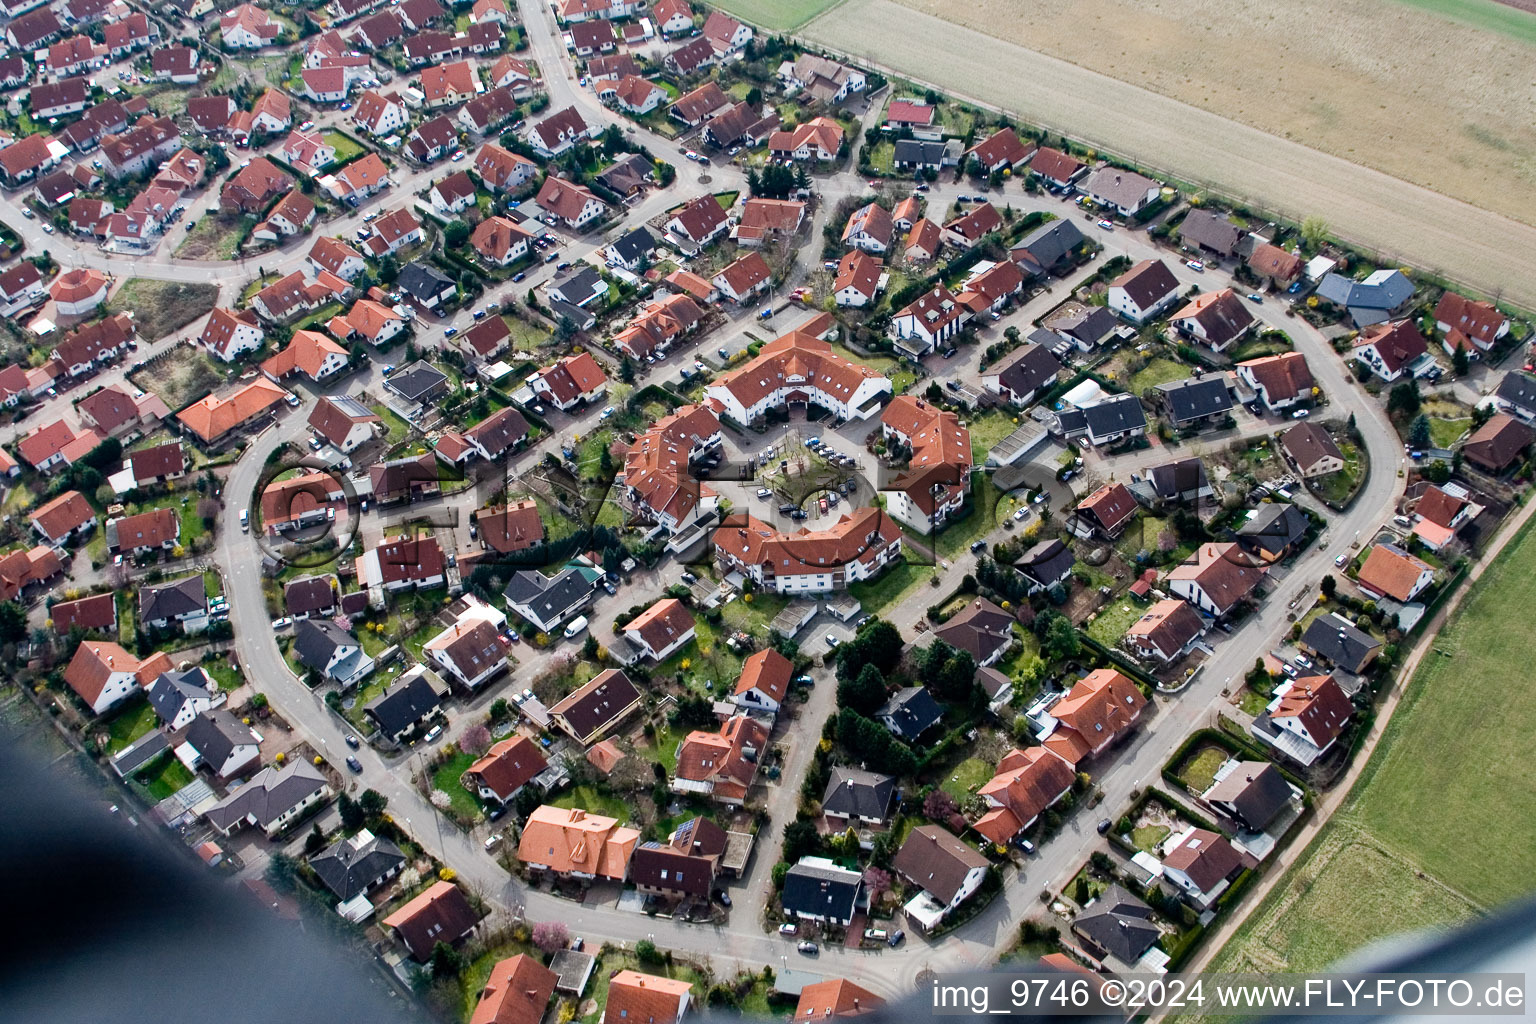 Aerial view of Queichtalring in Offenbach an der Queich in the state Rhineland-Palatinate, Germany